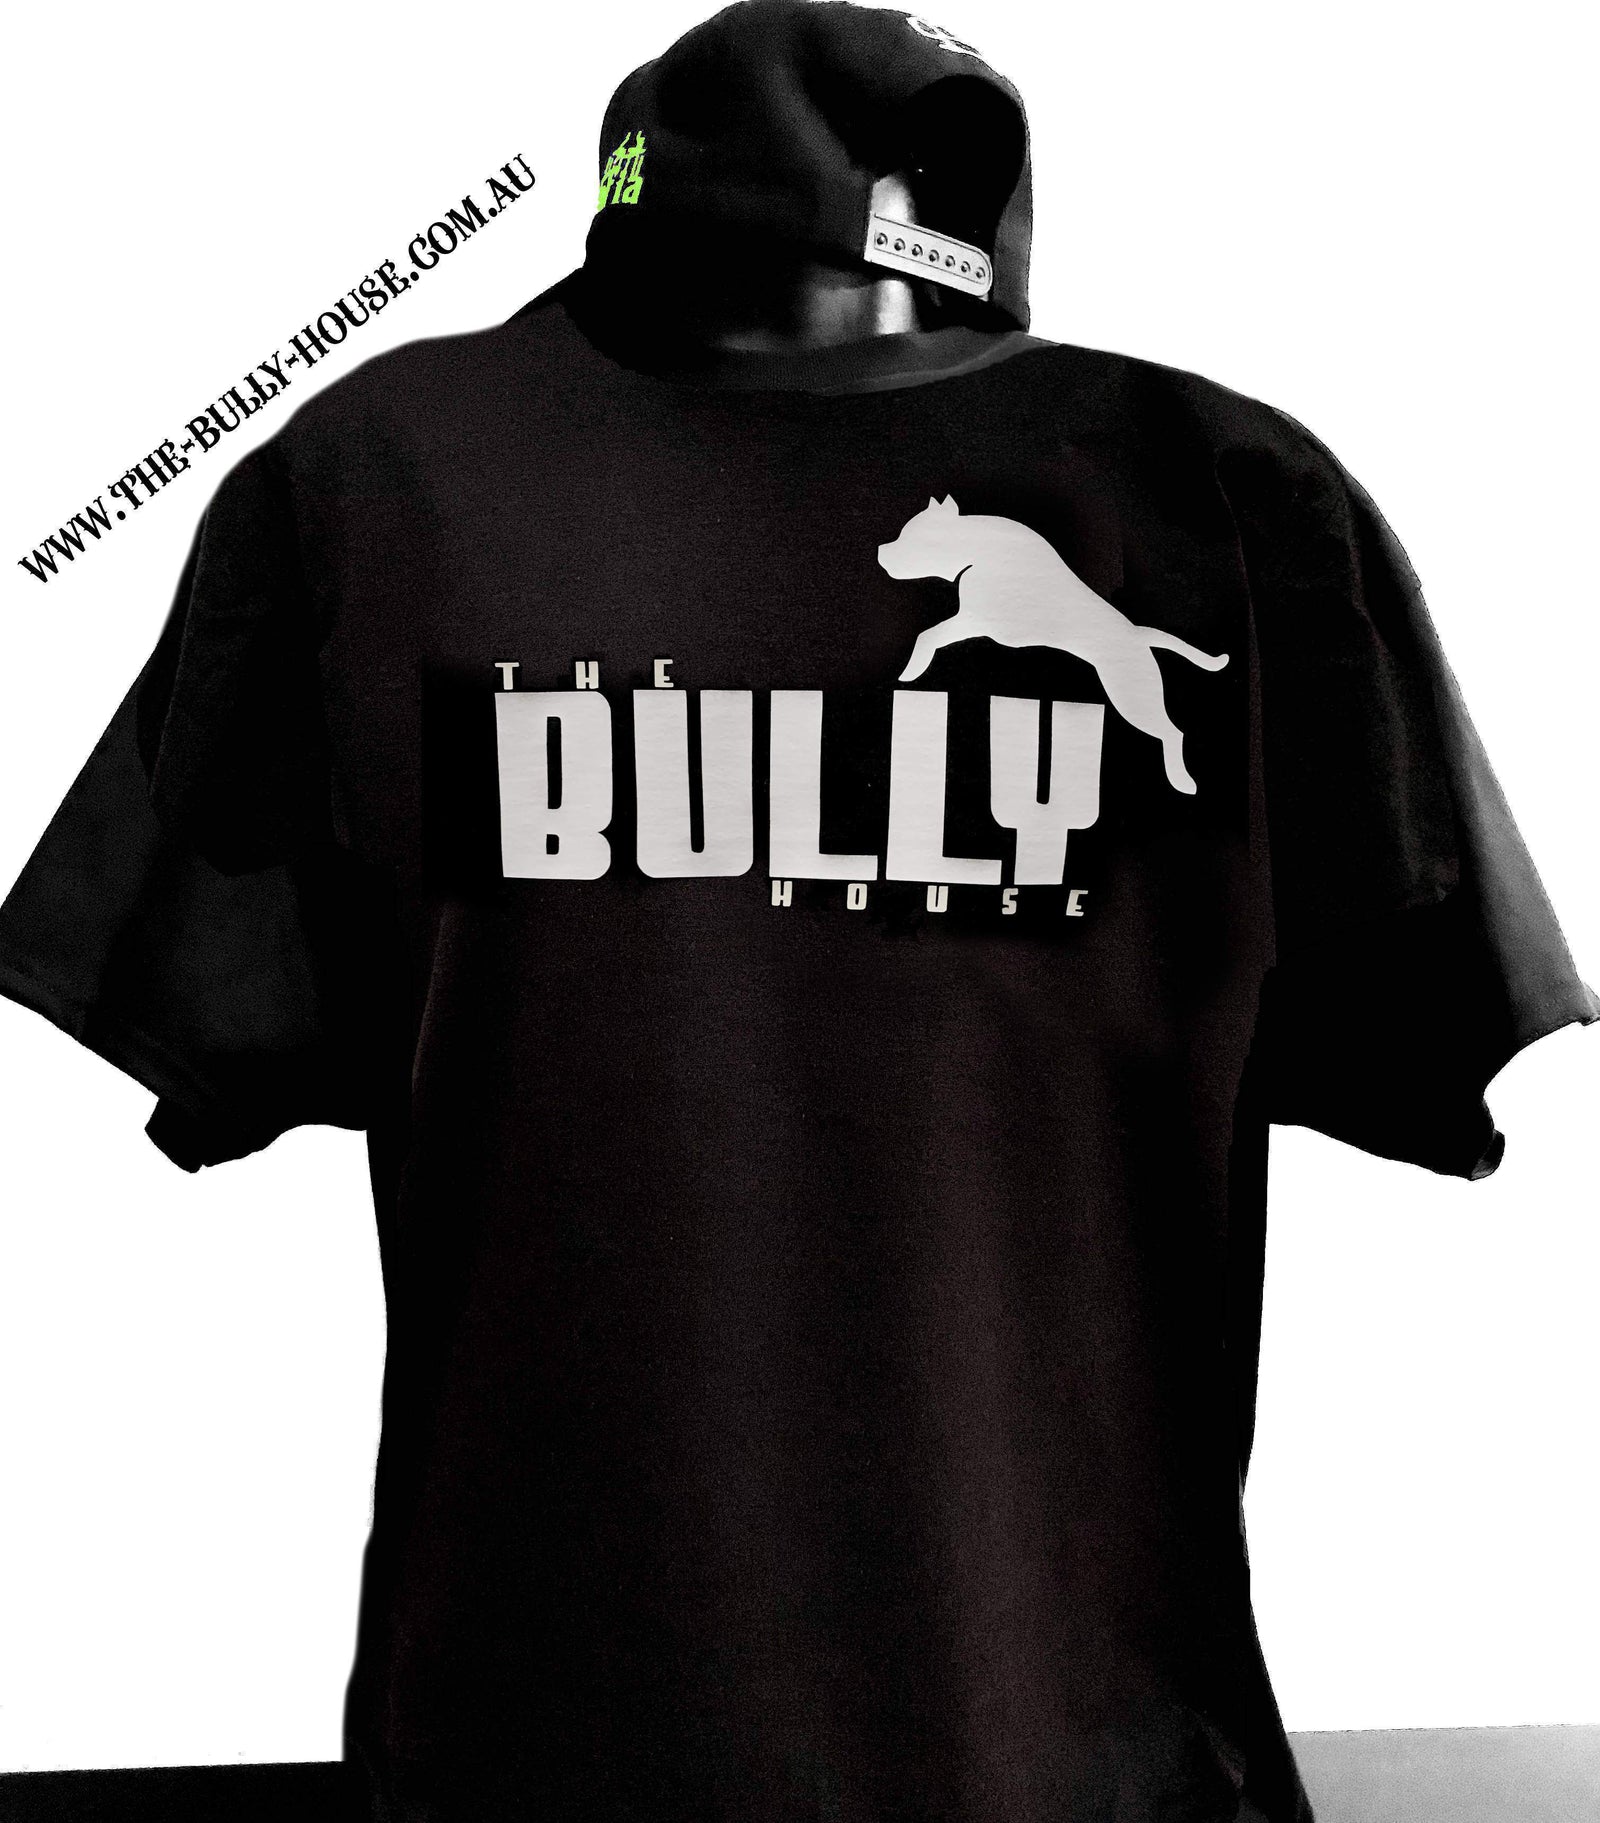 The Bully House -- INSPIRED NO.1 -- T-Shirt - MENS  CUT // White Print